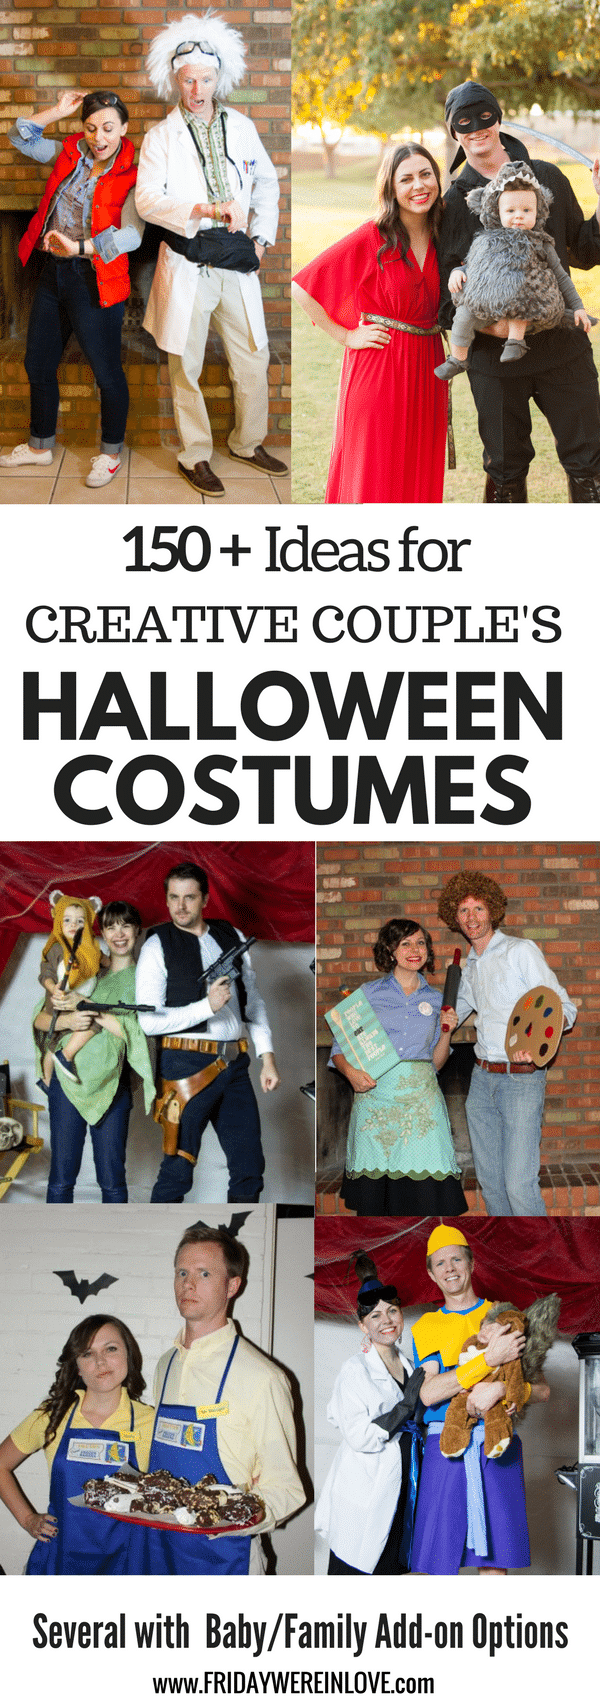 Over 150 Couple’s Halloween Costume Ideas (With Family Costume Ideas Too!)